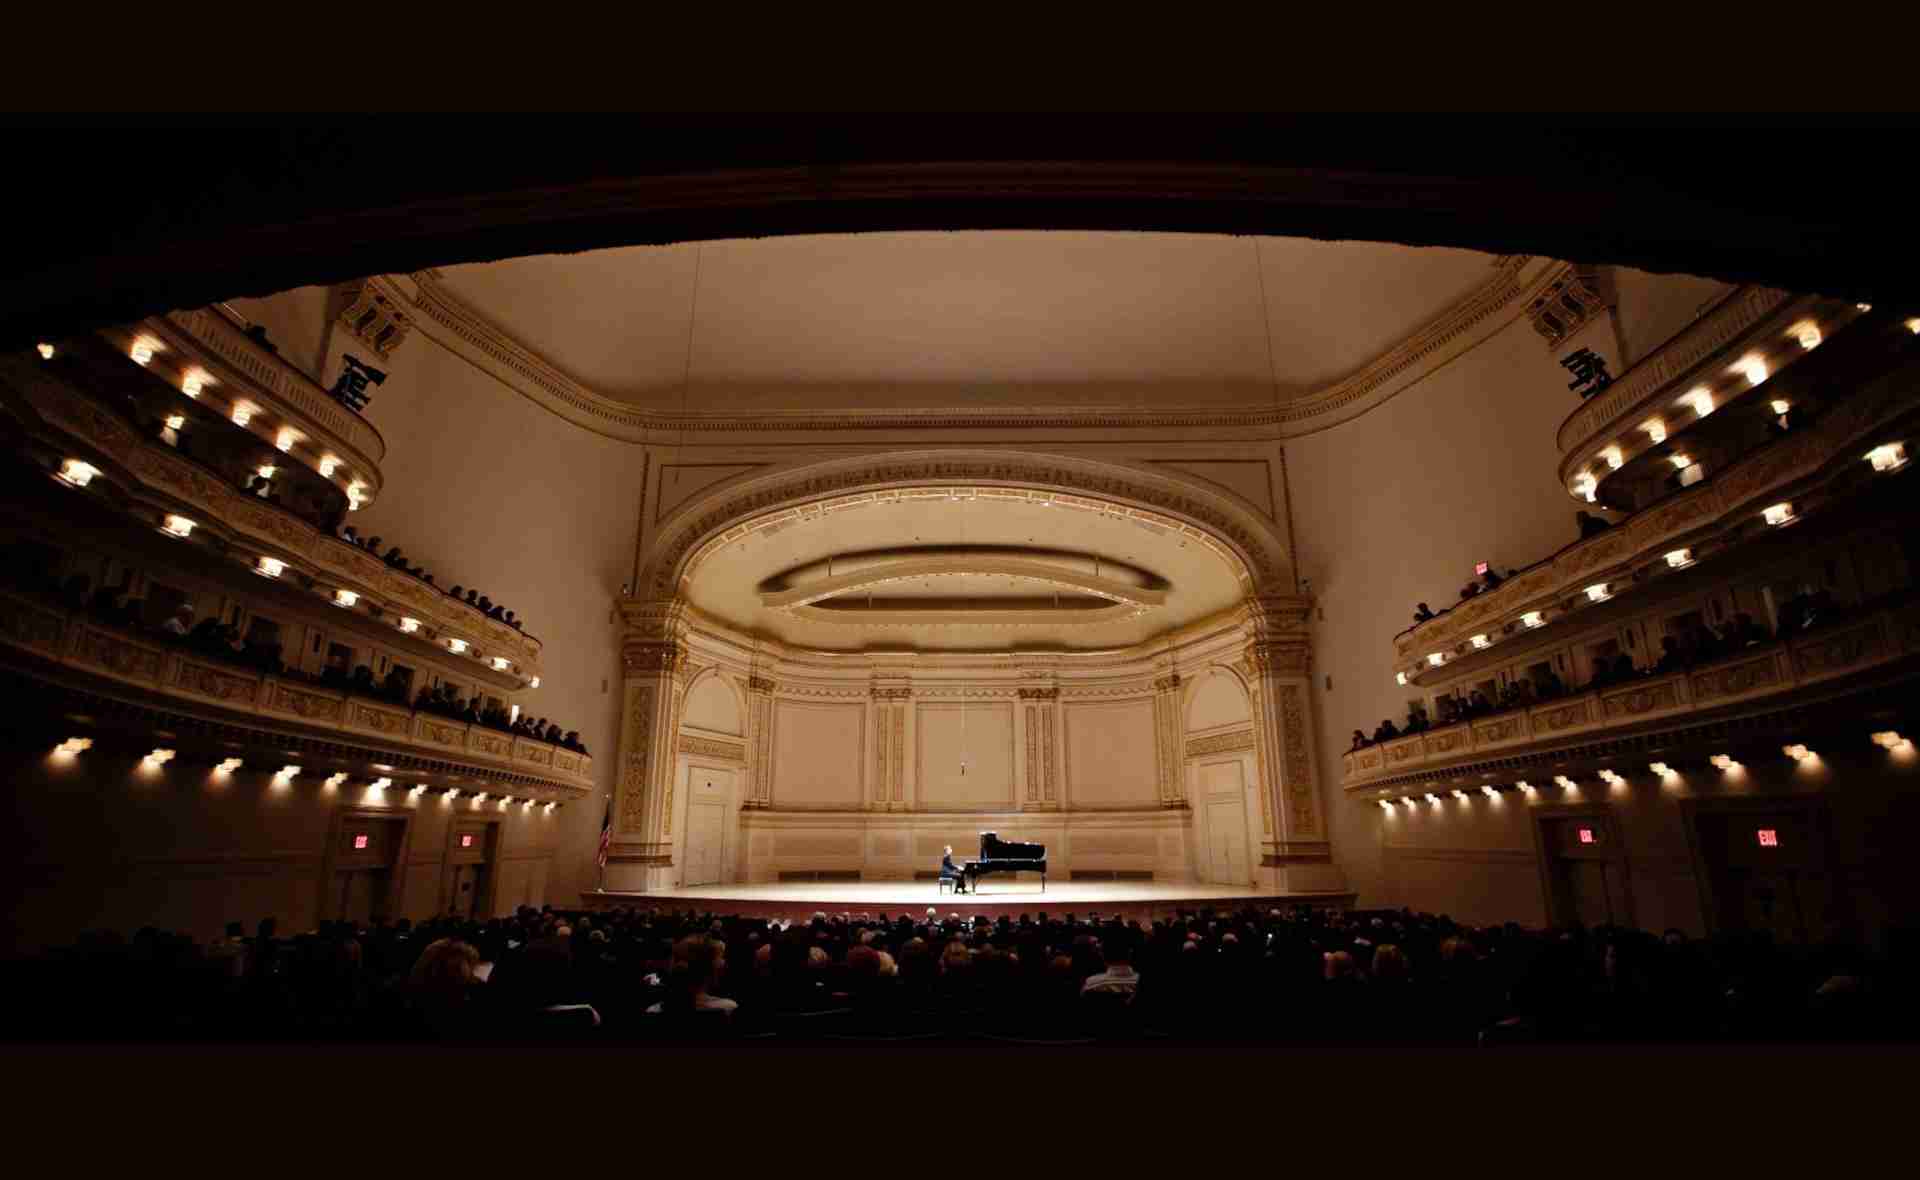 II. New York Franz Liszt International Piano Competition and Festival